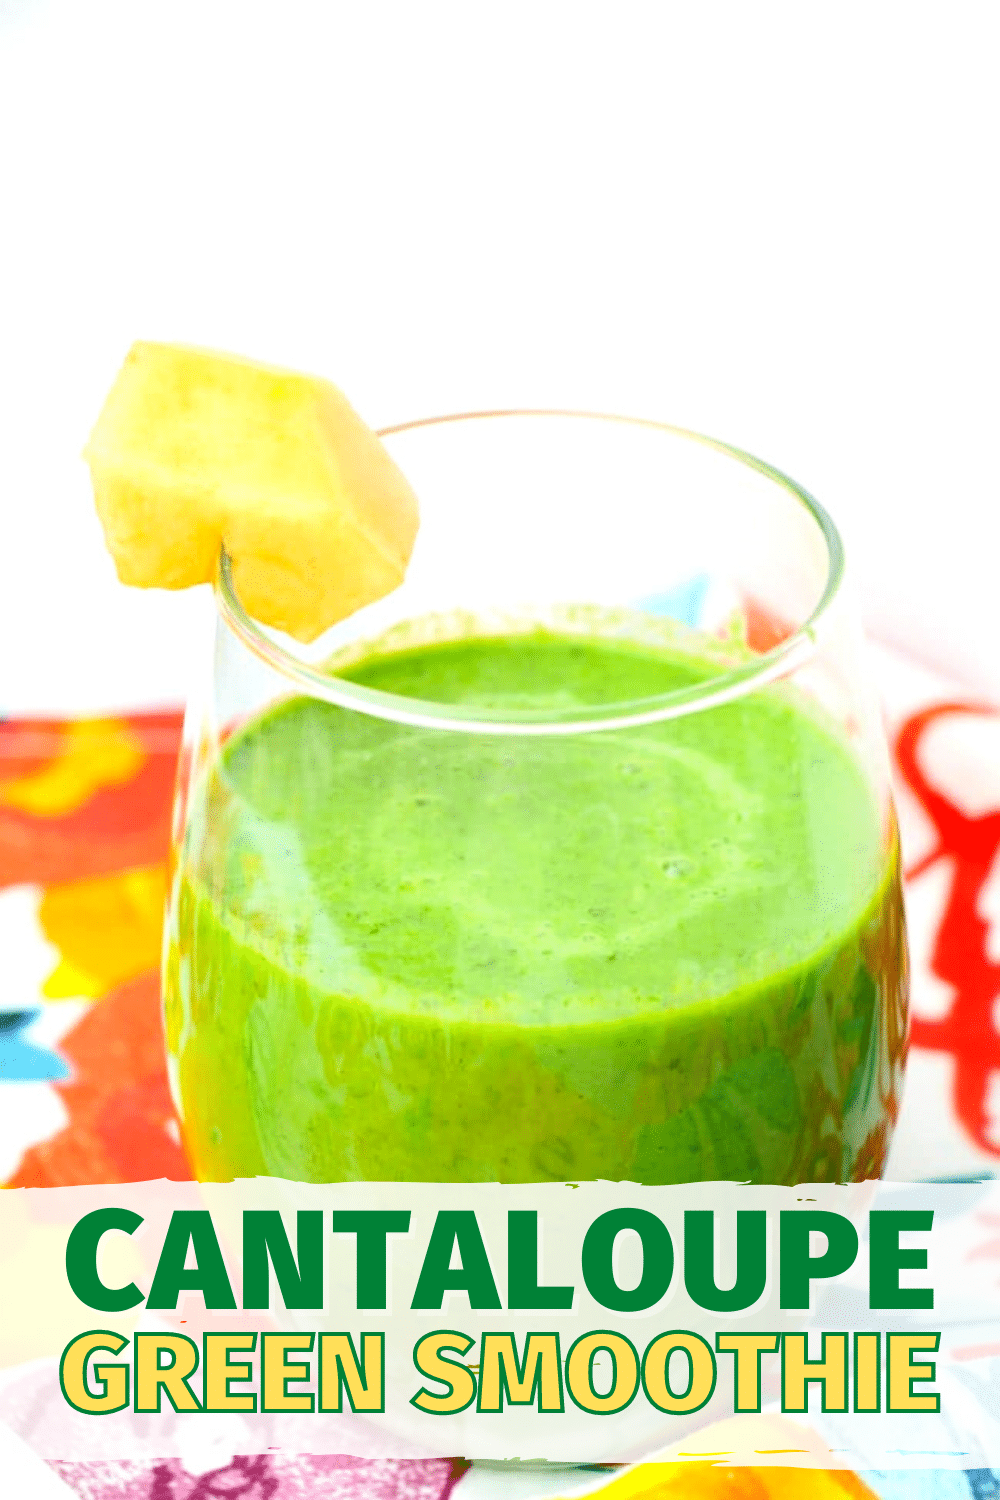 This Cantaloupe Green Smoothie is as delicious as it is nutritious and easy to make. All you need are four simple ingredients and a few minutes to make it. #smoothie #smoothierecipe #cantaloupe #greensmoothie via @wondermomwannab